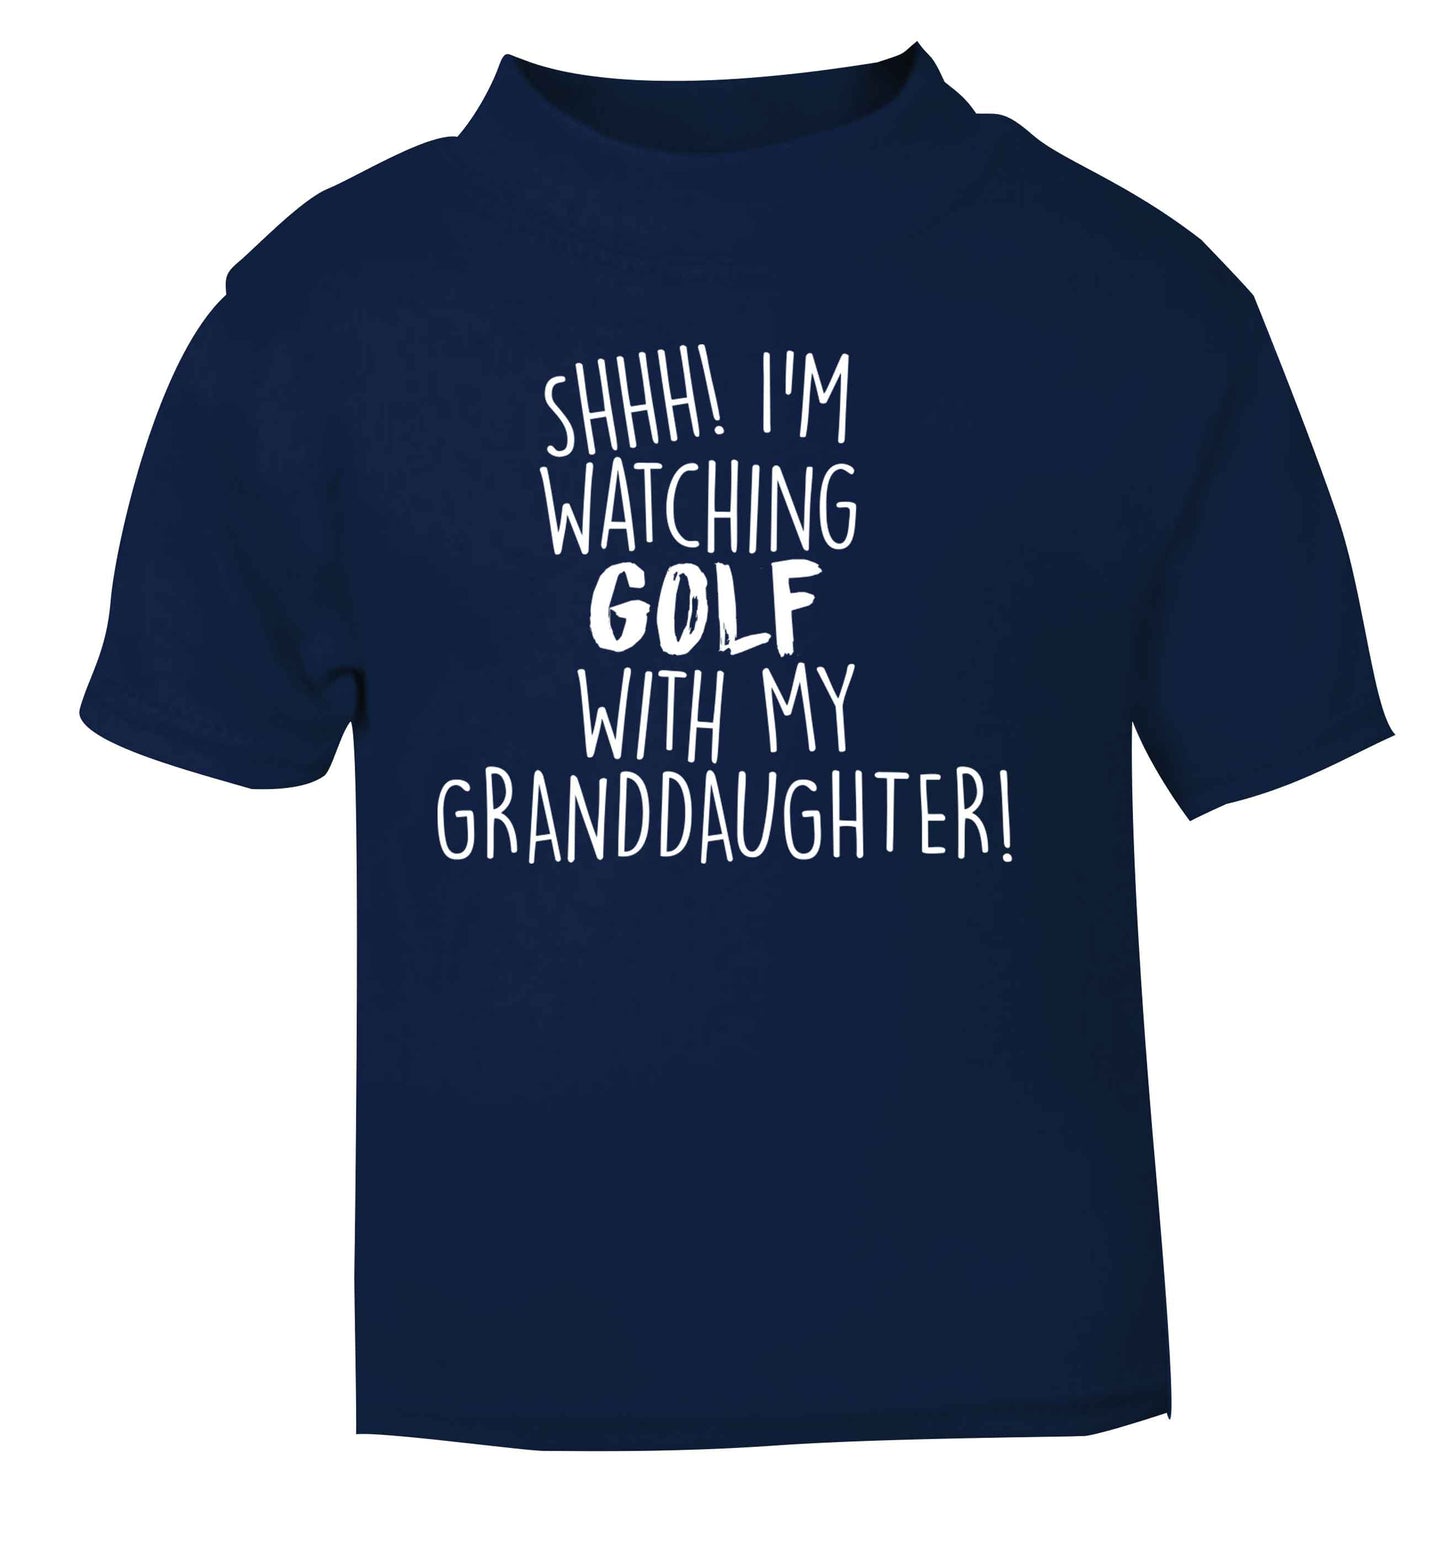 Shh I'm watching golf with my granddaughter navy Baby Toddler Tshirt 2 Years